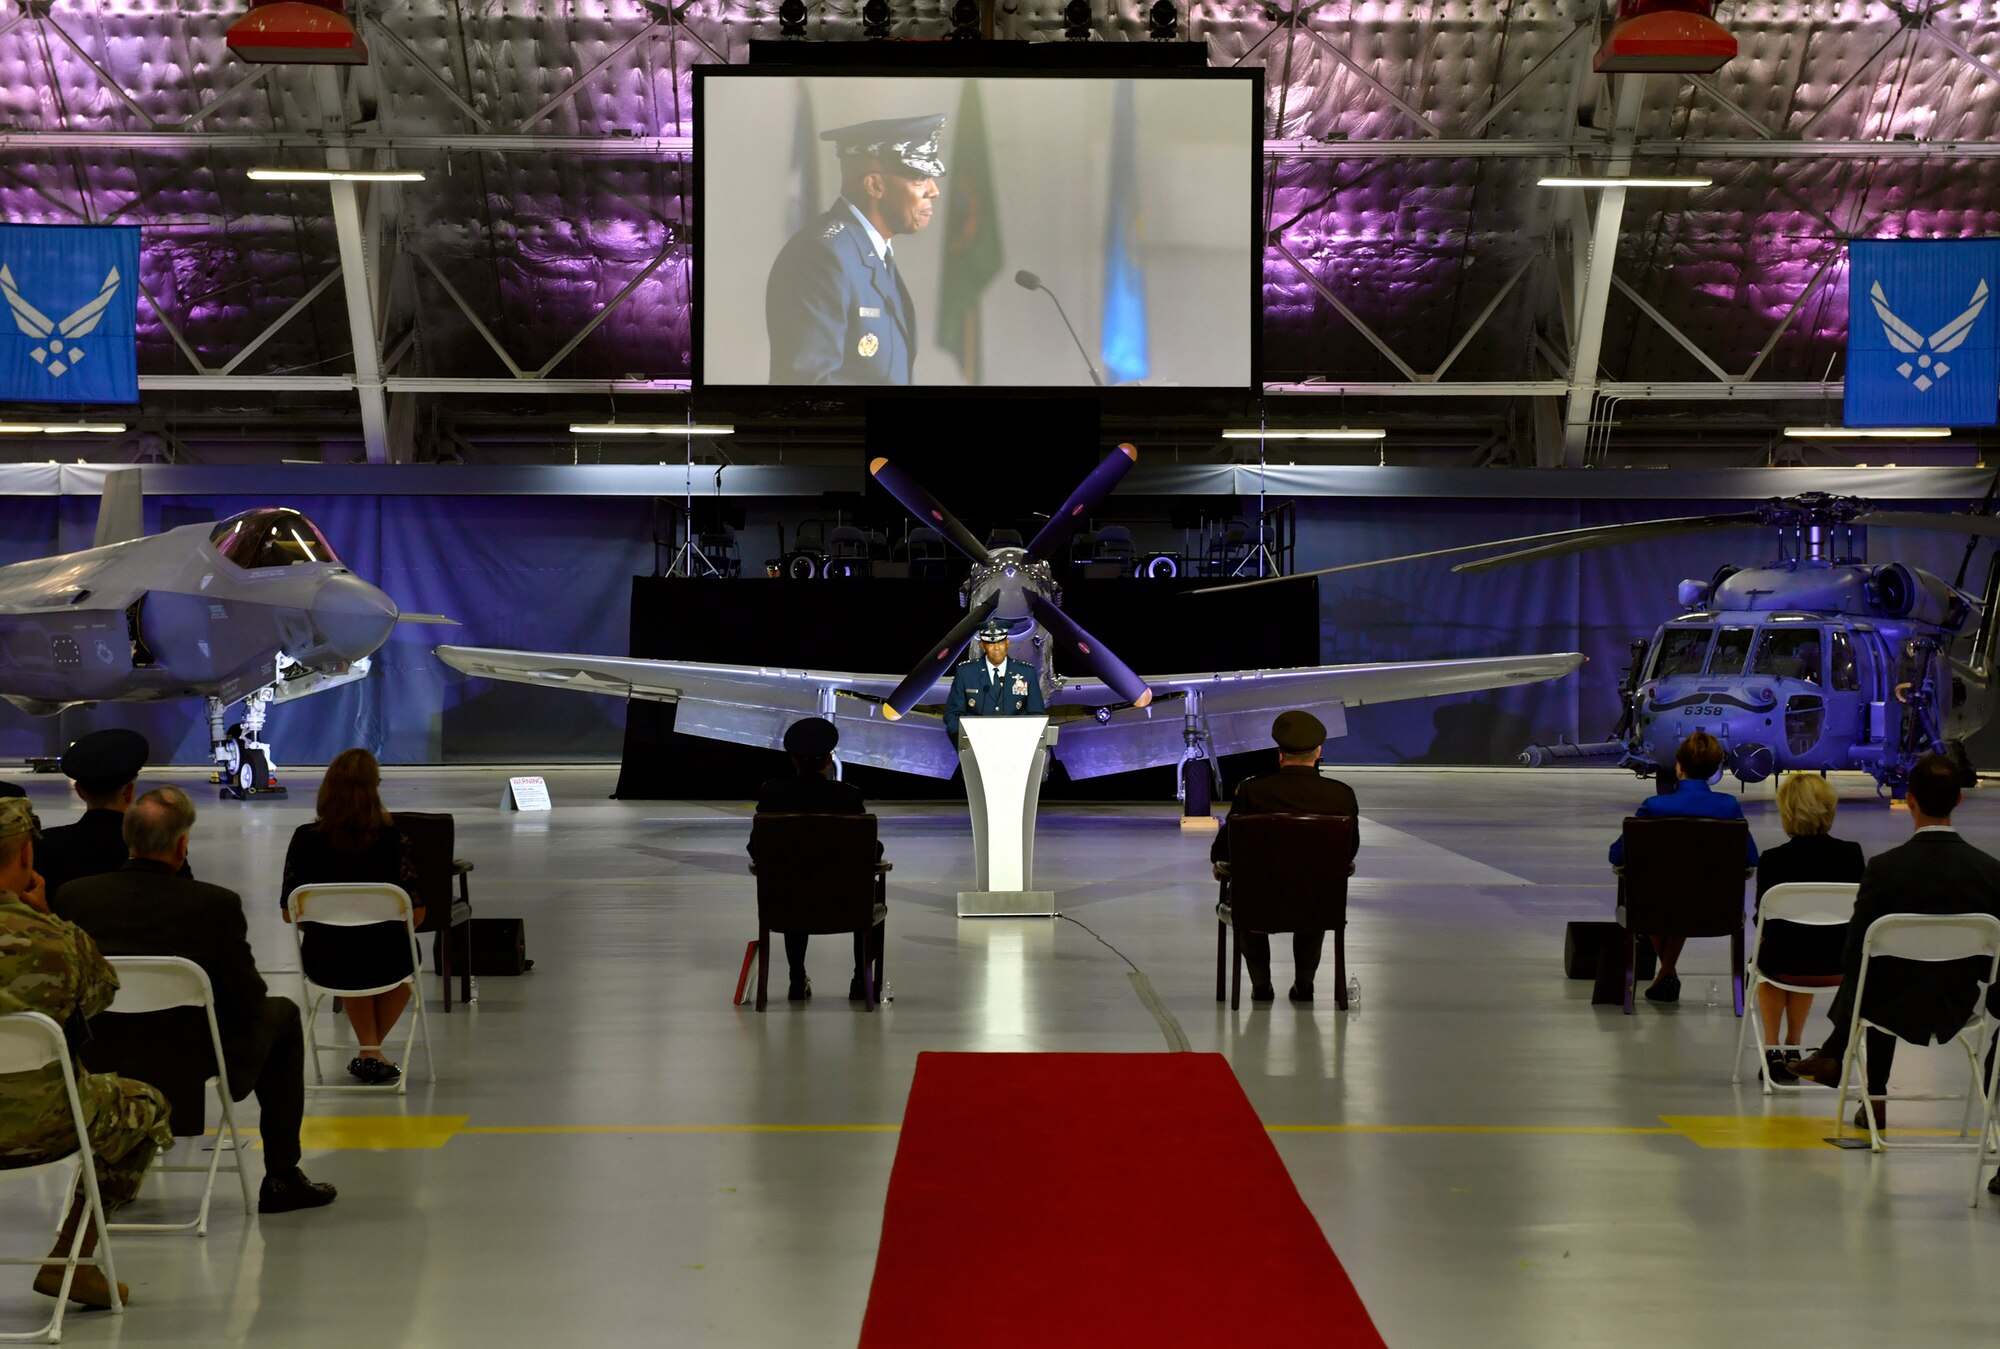 Incoming Air Force Chief of Staff Gen. Charles Q. Brown Jr. speaks during the CSAF Transfer of Responsibility ceremony at Joint Base Andrews, Md., Aug. 6, 2020. Brown is the 22nd Chief of Staff of the Air Force. (U.S. Air Force photo by Wayne Clark)